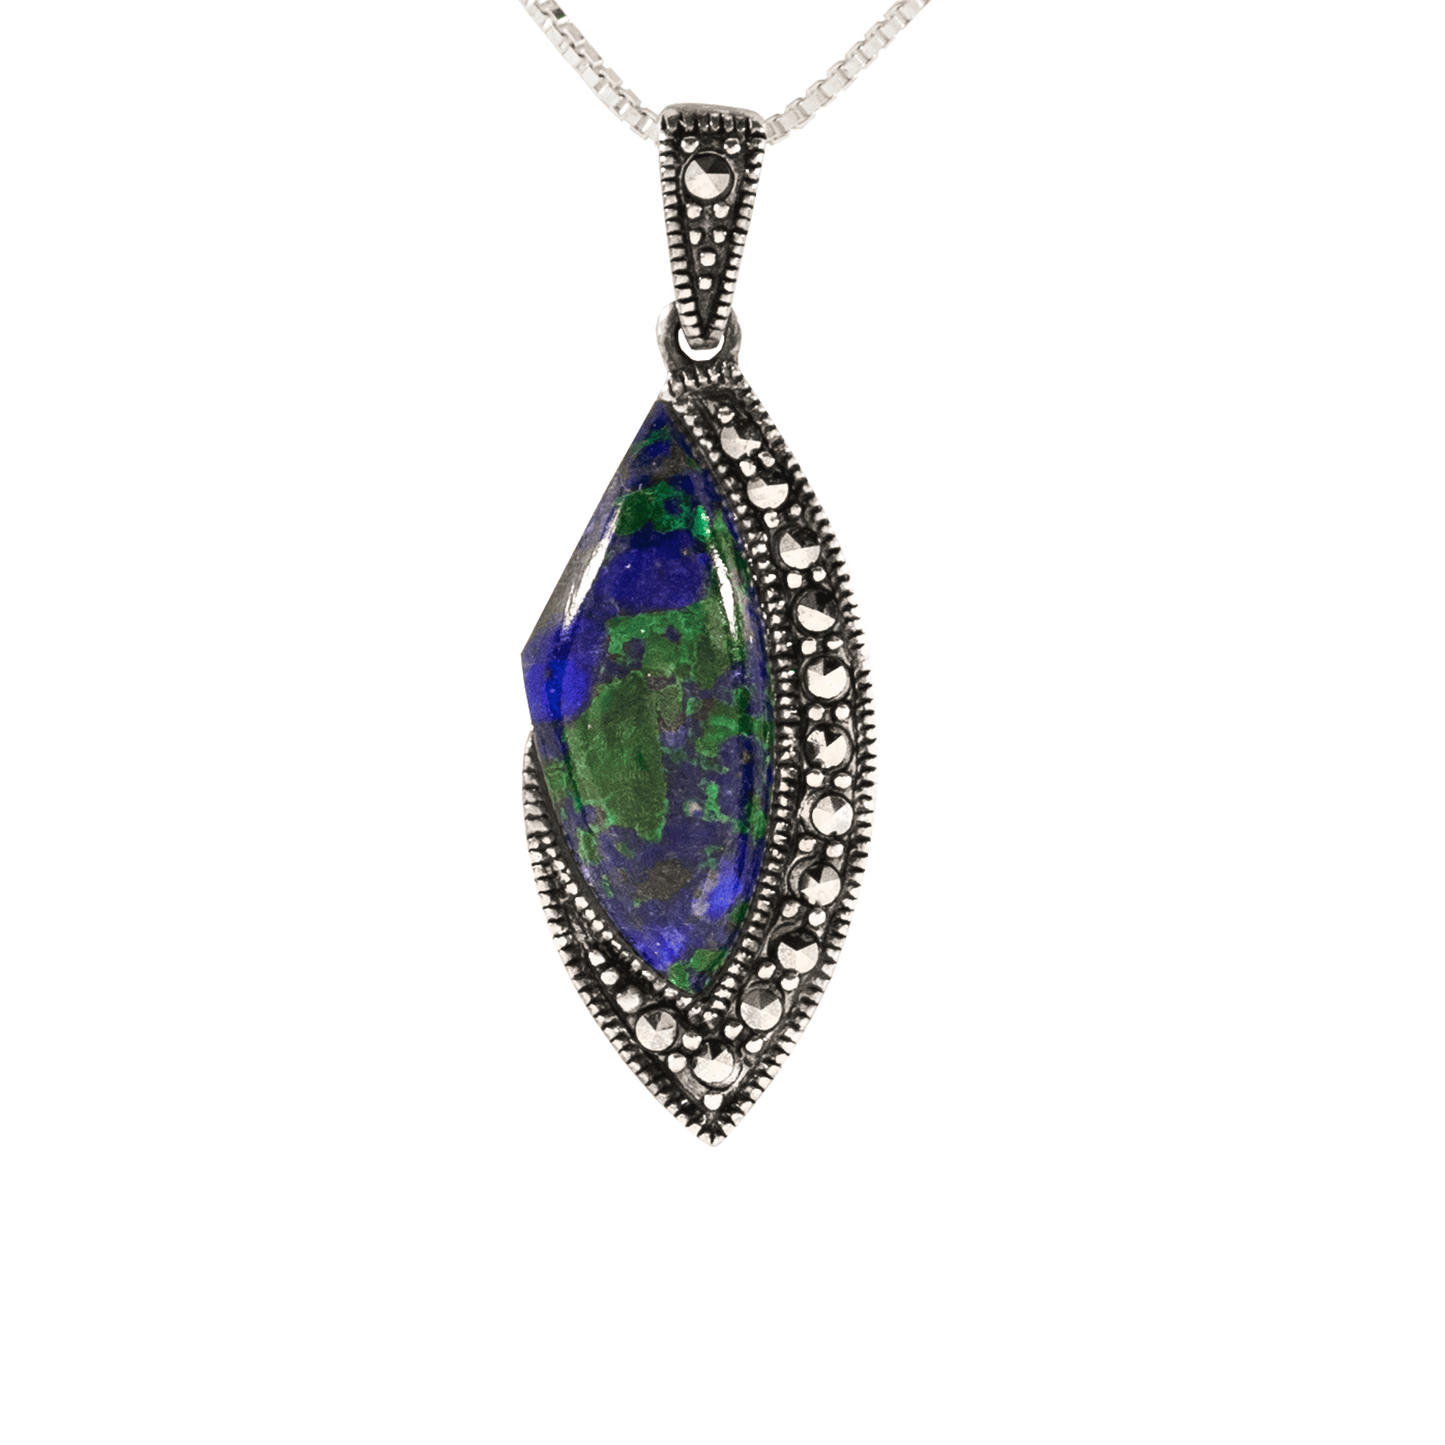 Stunning Eilat Stone with Marquise shape adorned with Marcasite Crystals.